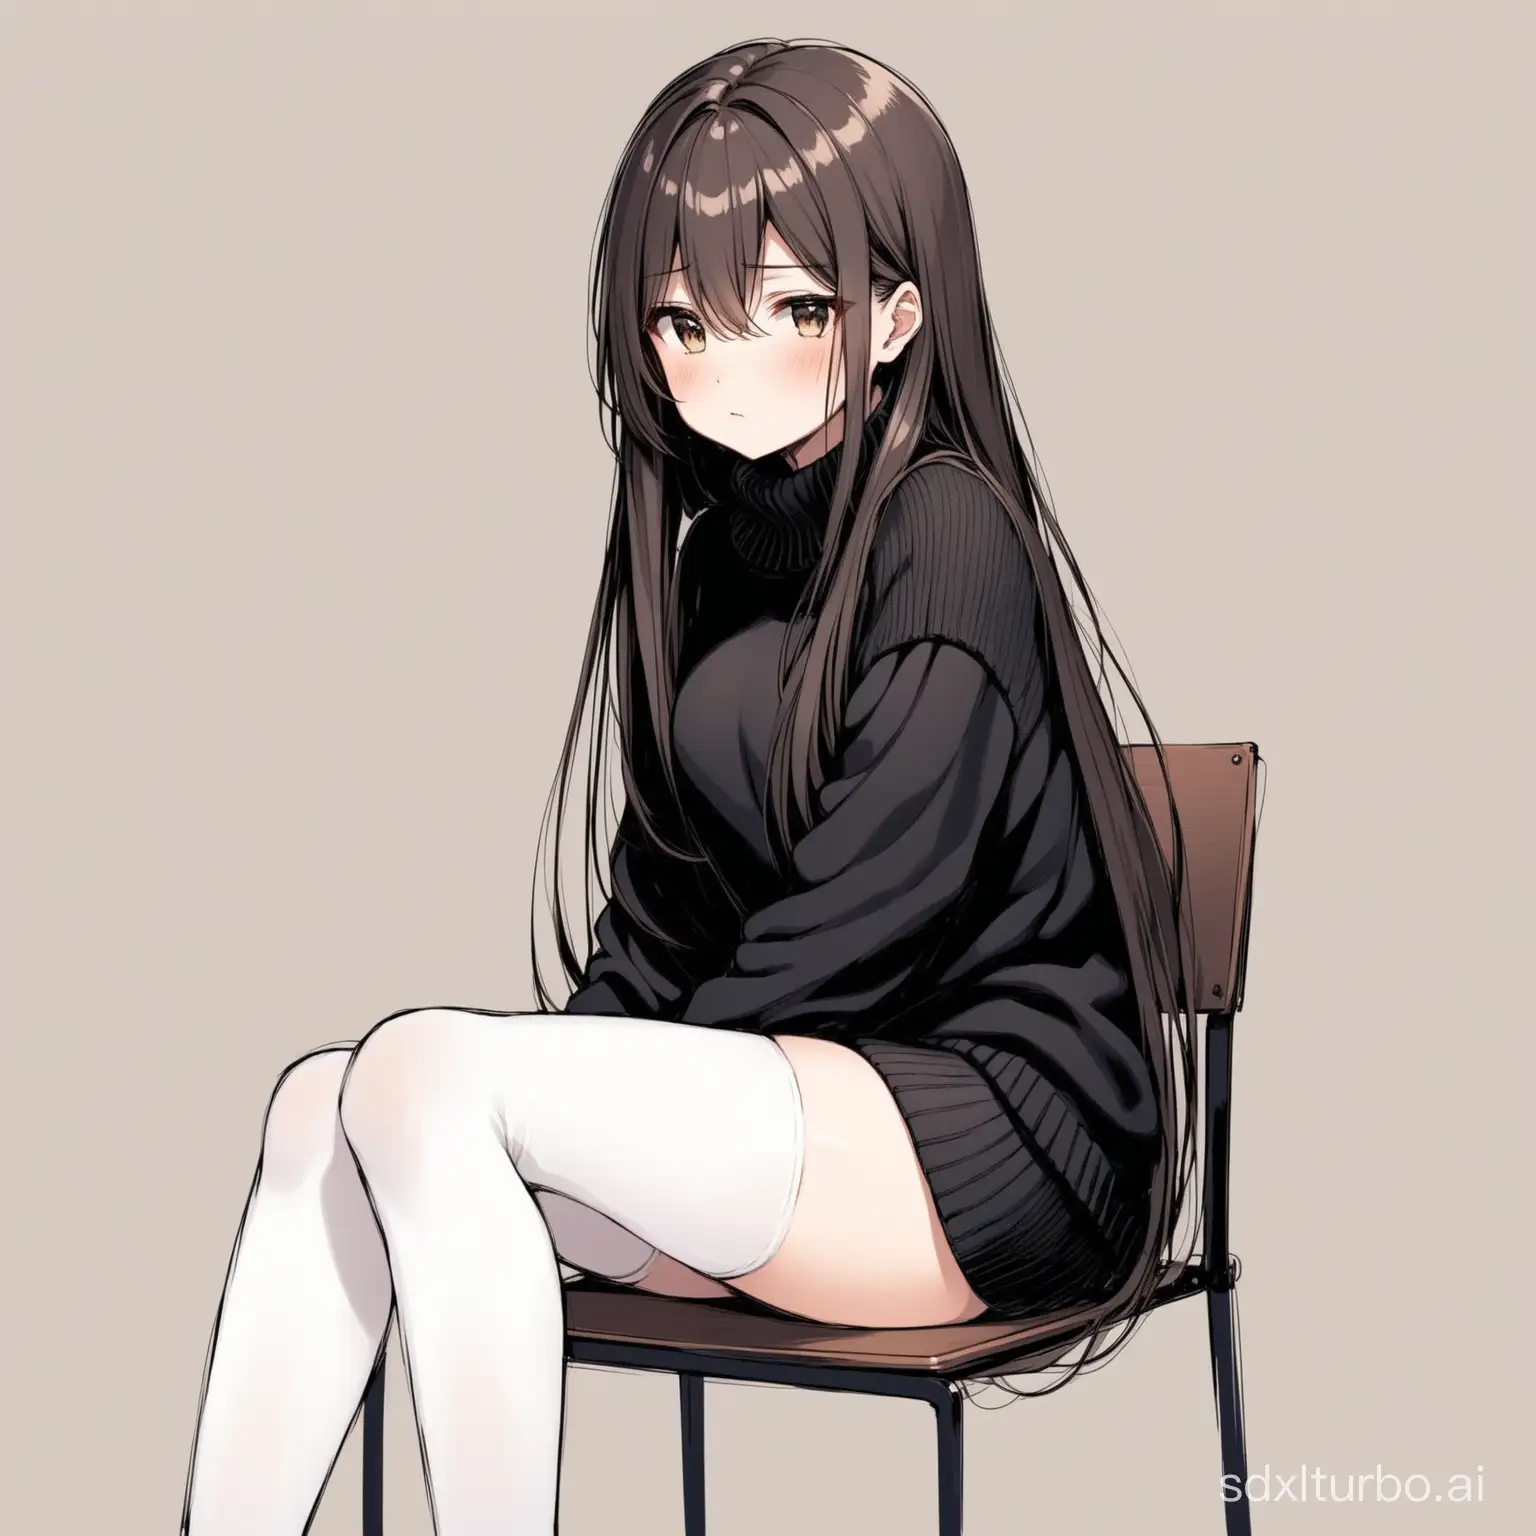 Disdainful-Girl-Sitting-with-Long-Hair-in-Black-Sweater-and-White-Stockings